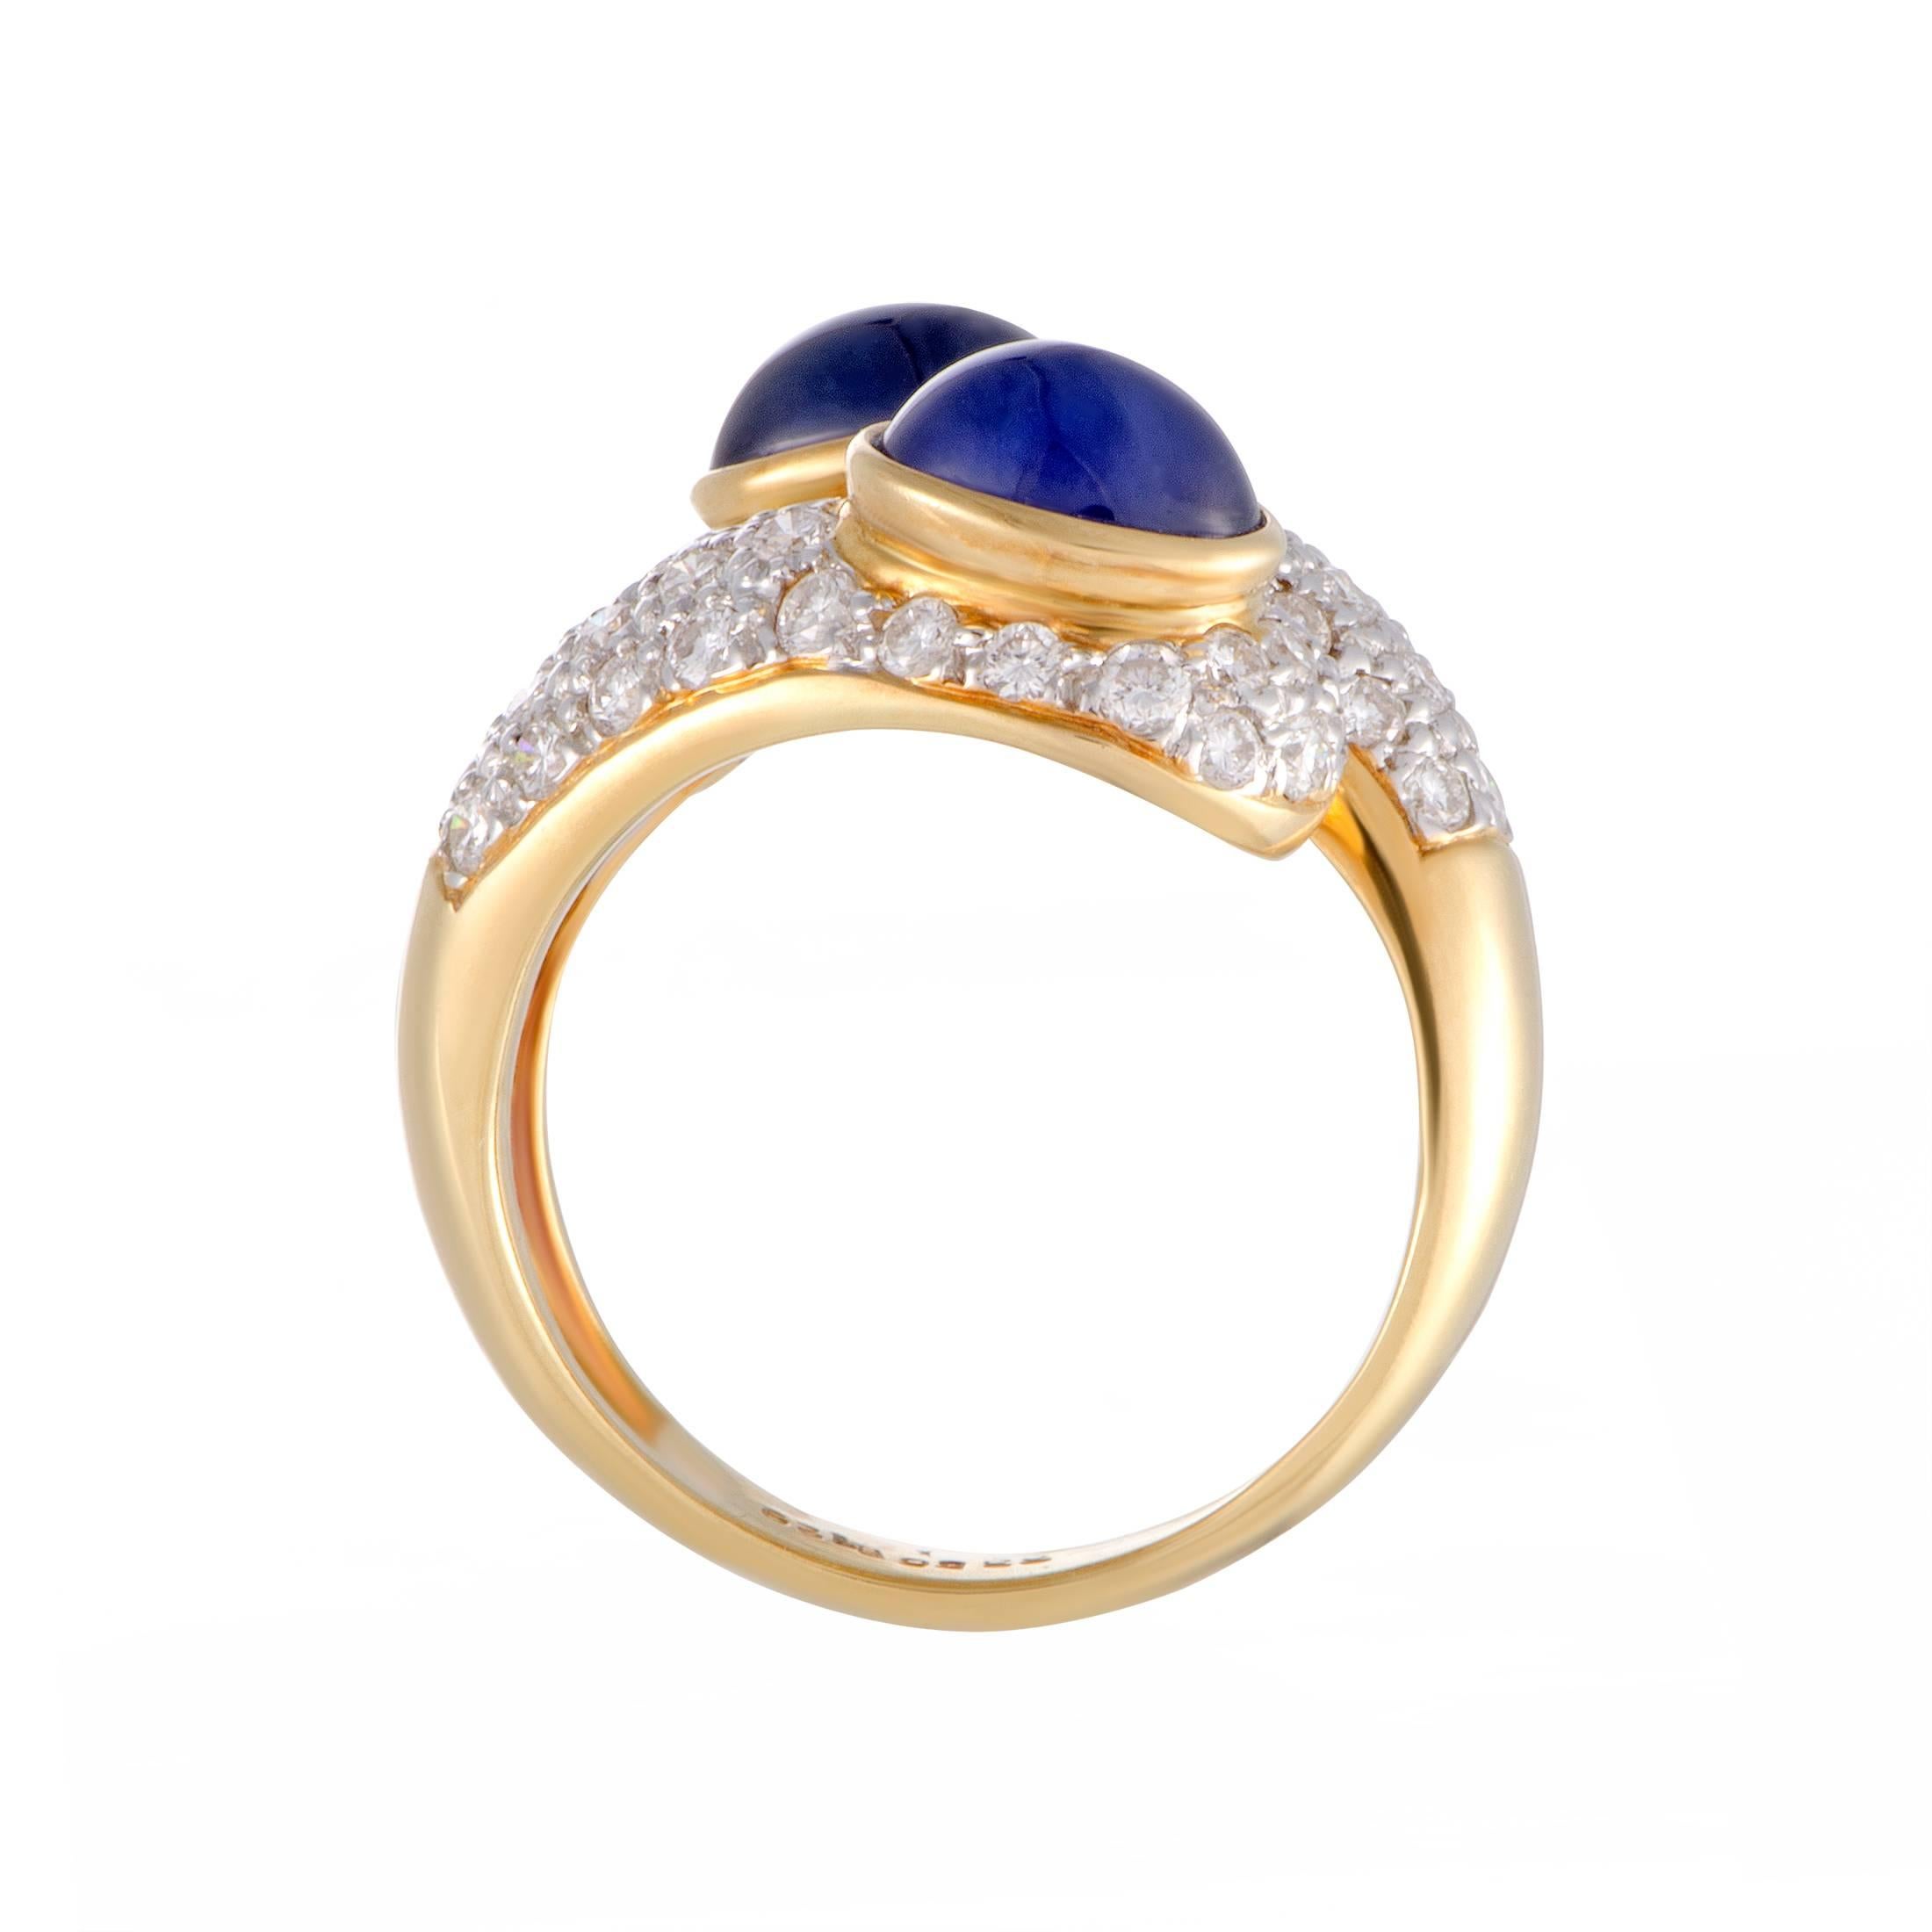 The luxurious blend of sapphires and diamonds is complemented in an exceptionally prestigious manner by the 18K yellow and white gold in this splendidly fashionable ring. The diamonds and sapphires weigh in total 1.29 and 3.56 carats